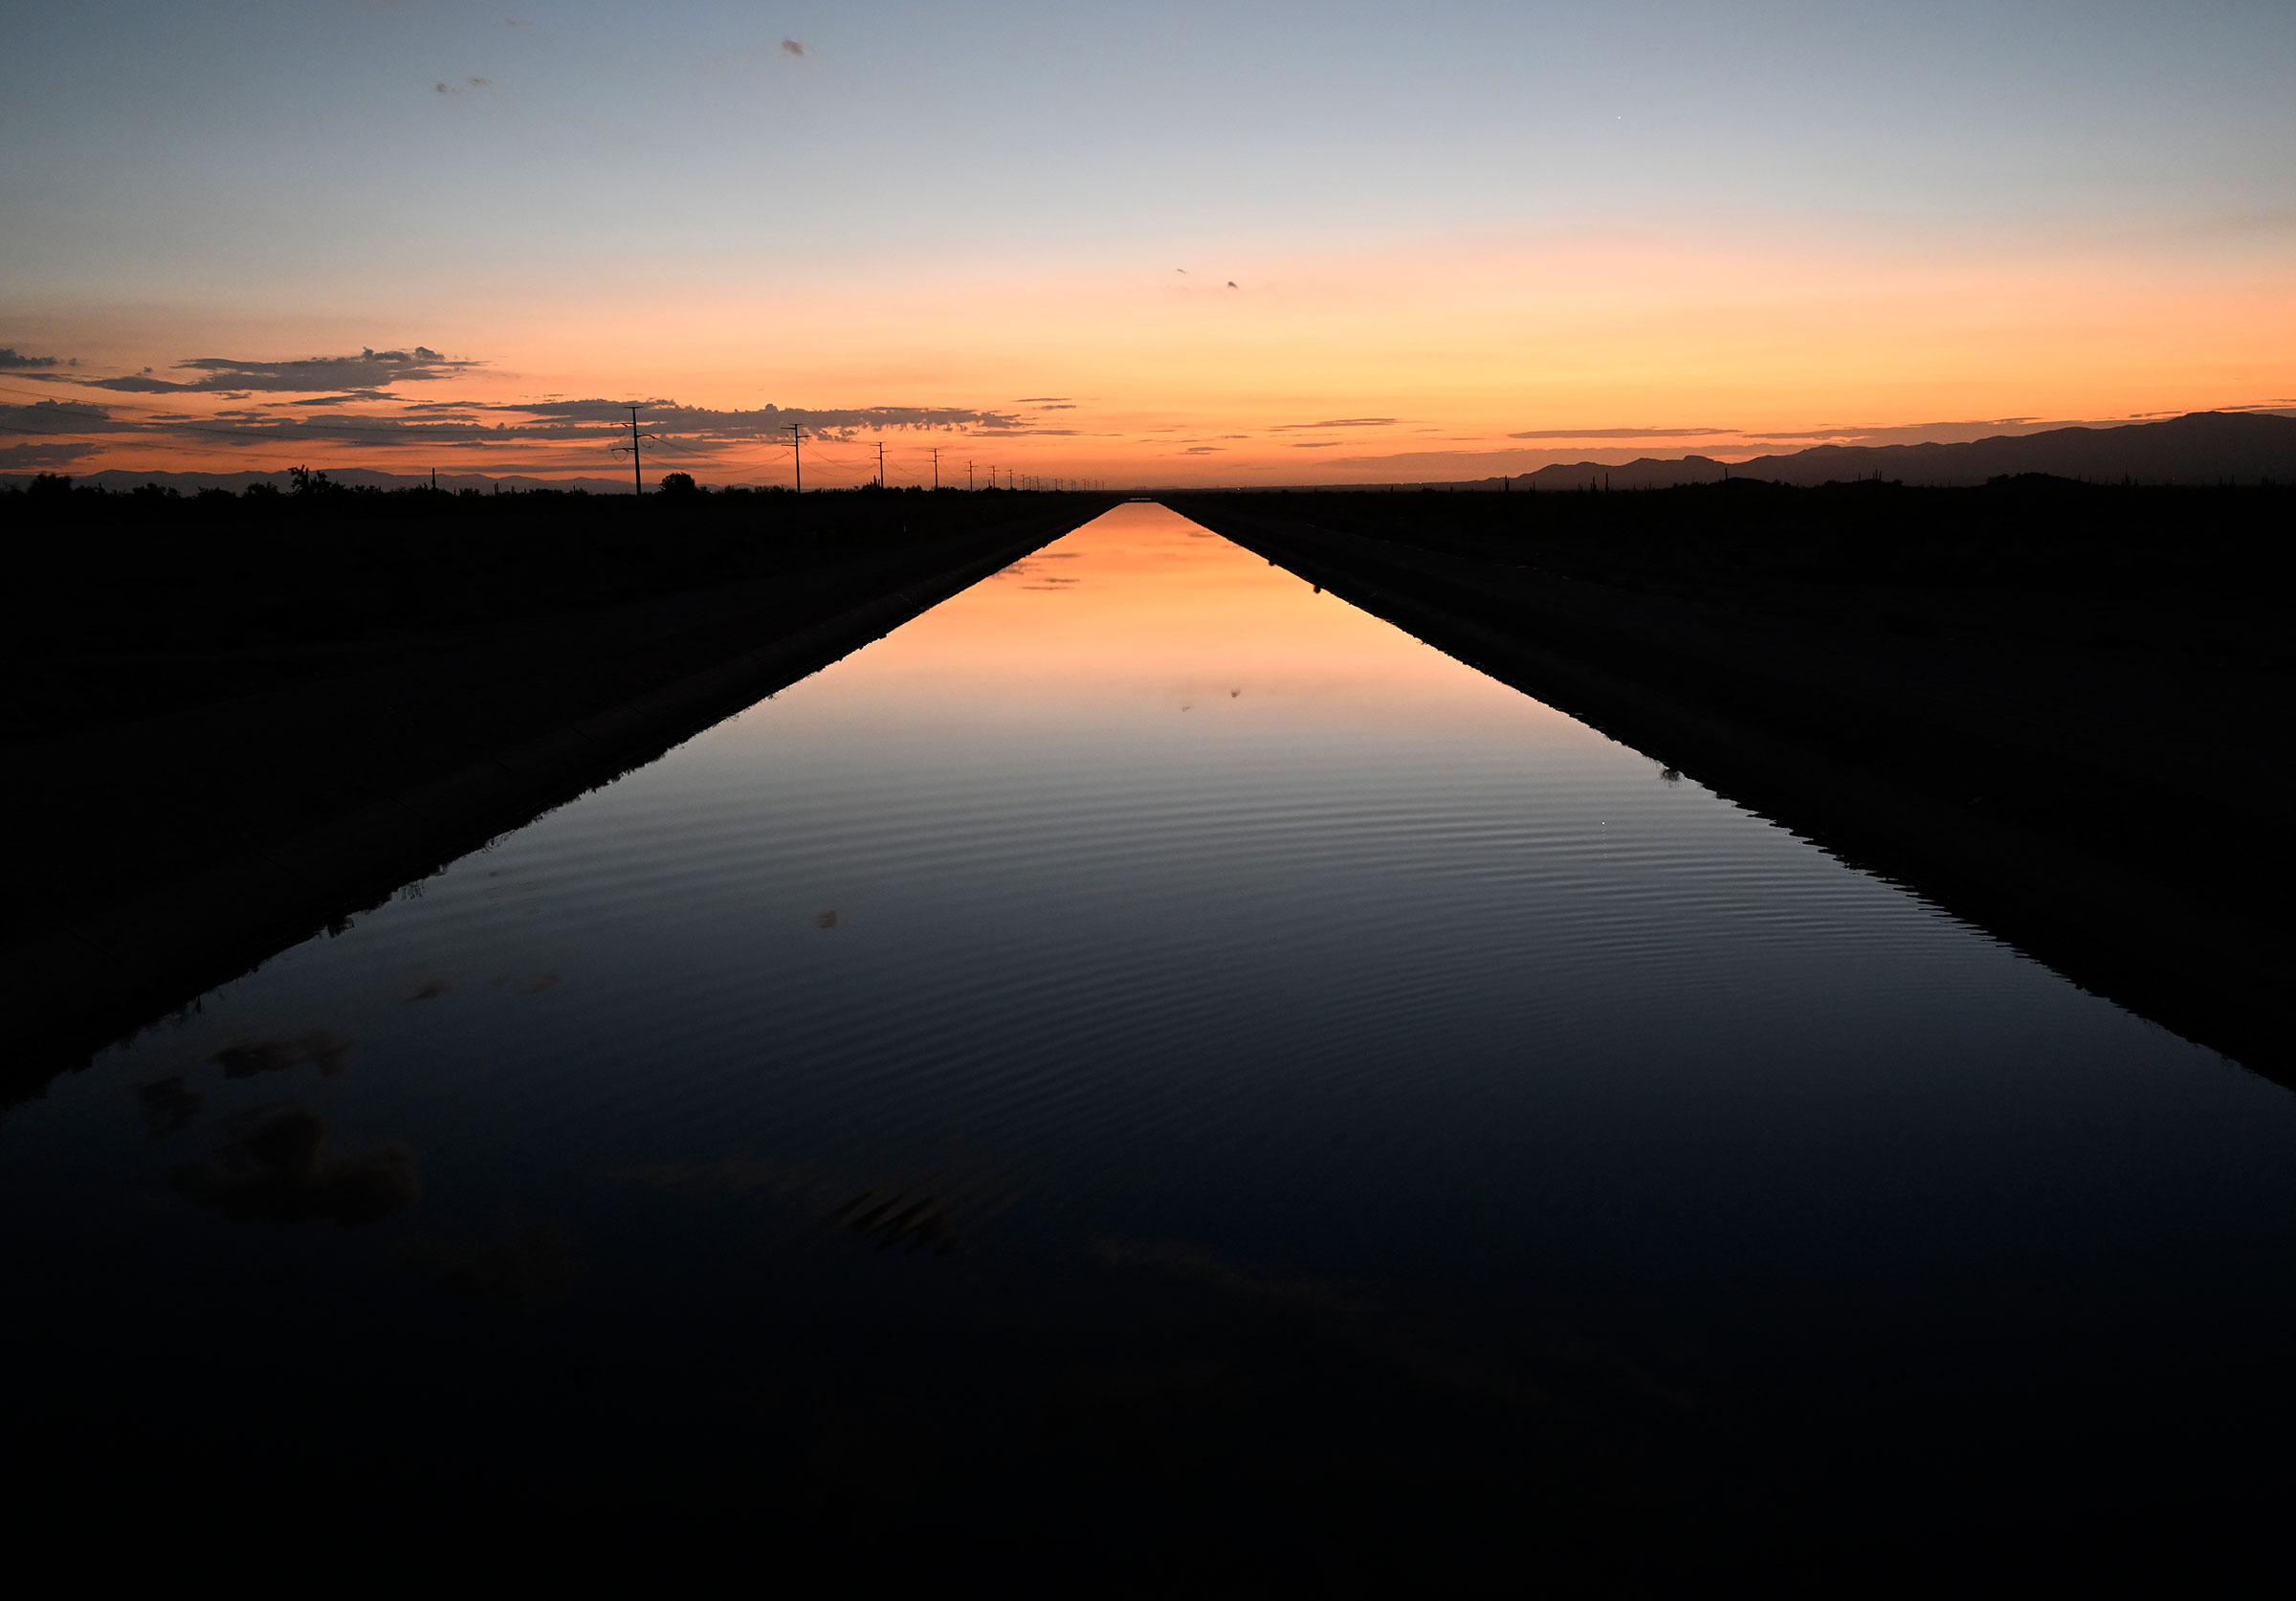 The sun rises over a canal that is full of Colorado River water on Aug. 17, 2022 near Buckeye, Ariz. (RJ Sangosti—MediaNews Group/The Denver Post/Getty Images)